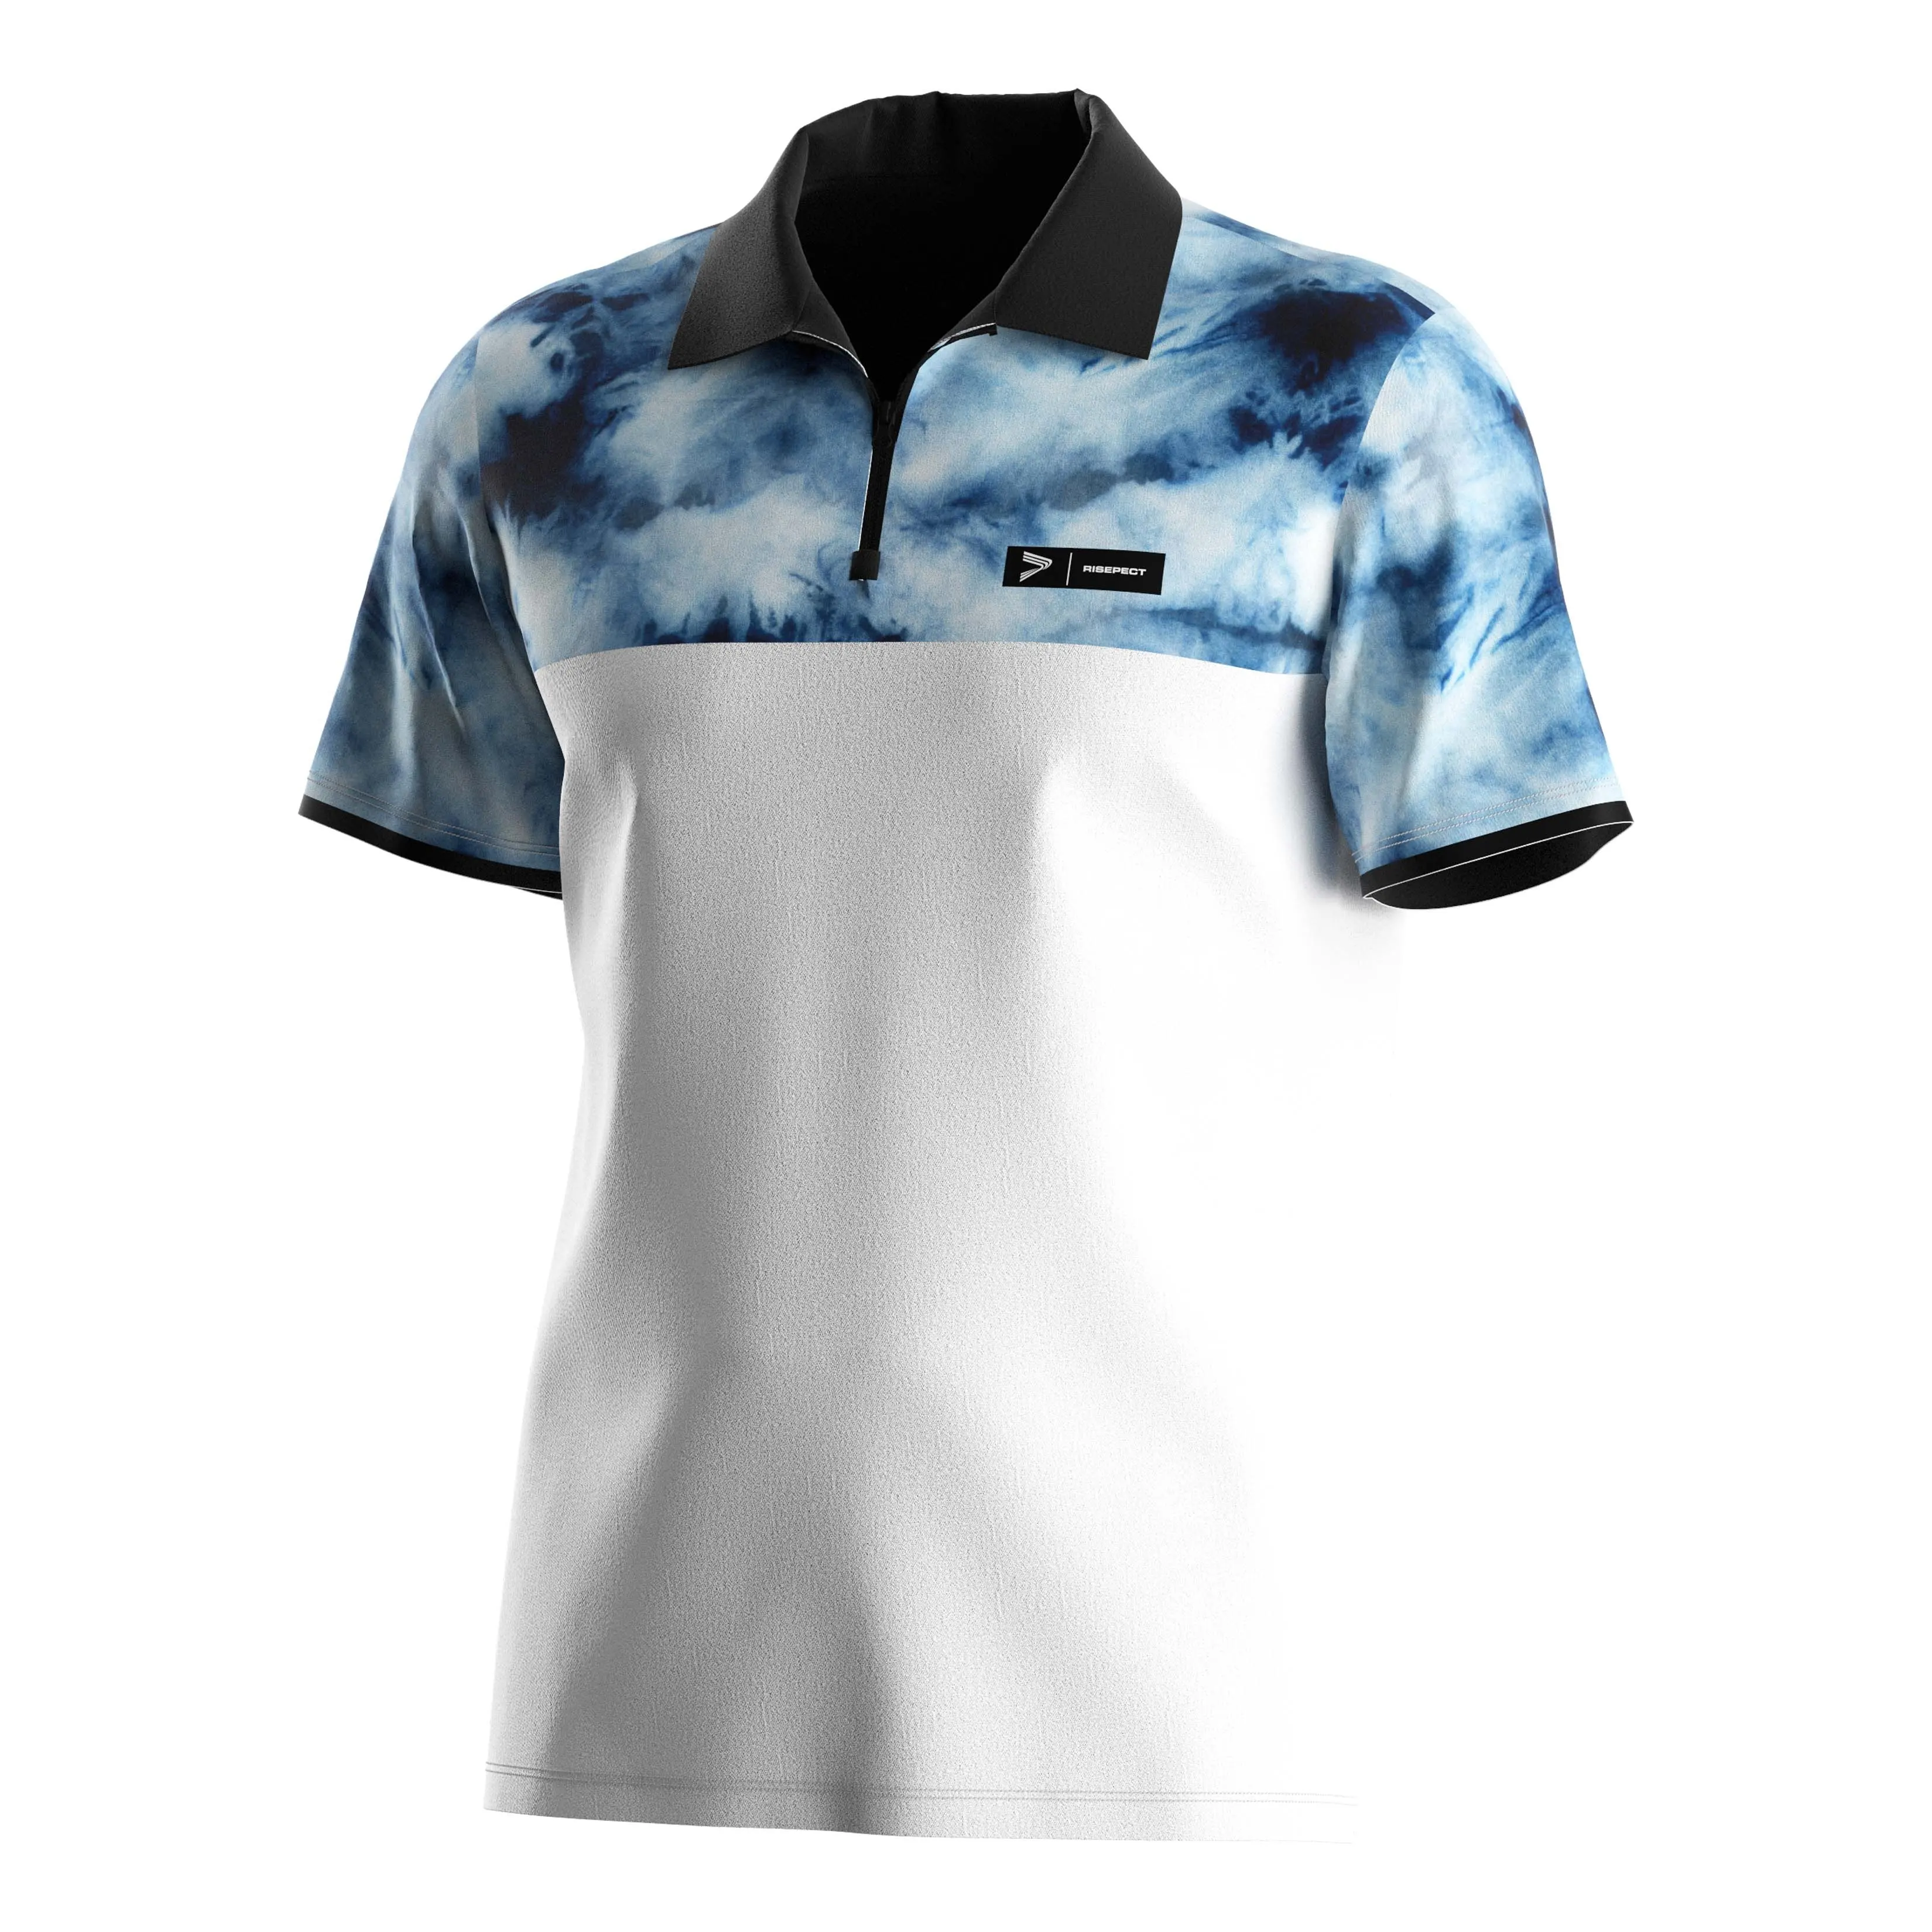 High Quality Sublimation Half Sleeve Sports Tee 100 Polyester Shirts Zipper Shirt Polo T-Shirts For Men And Women